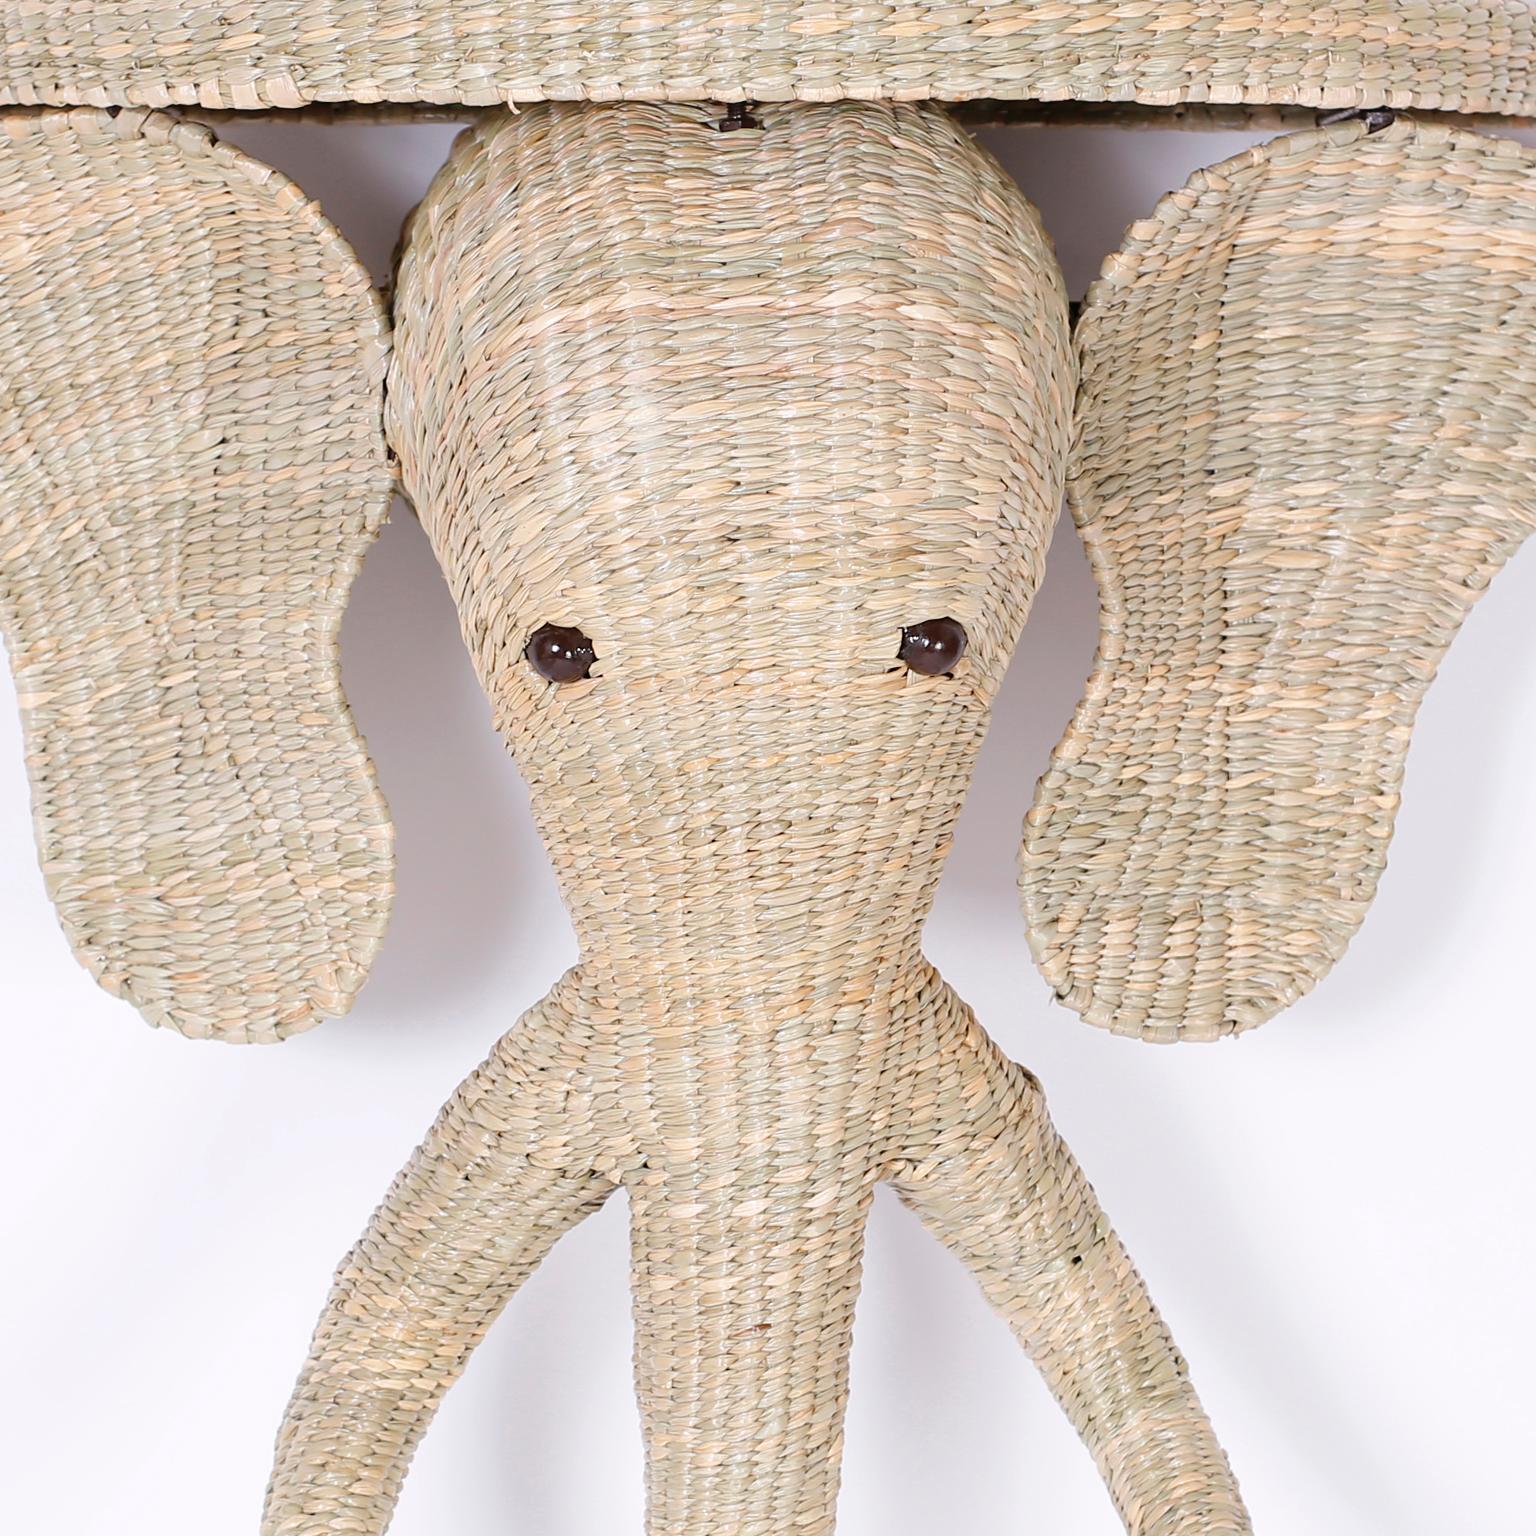 British Colonial Wicker Elephant Console